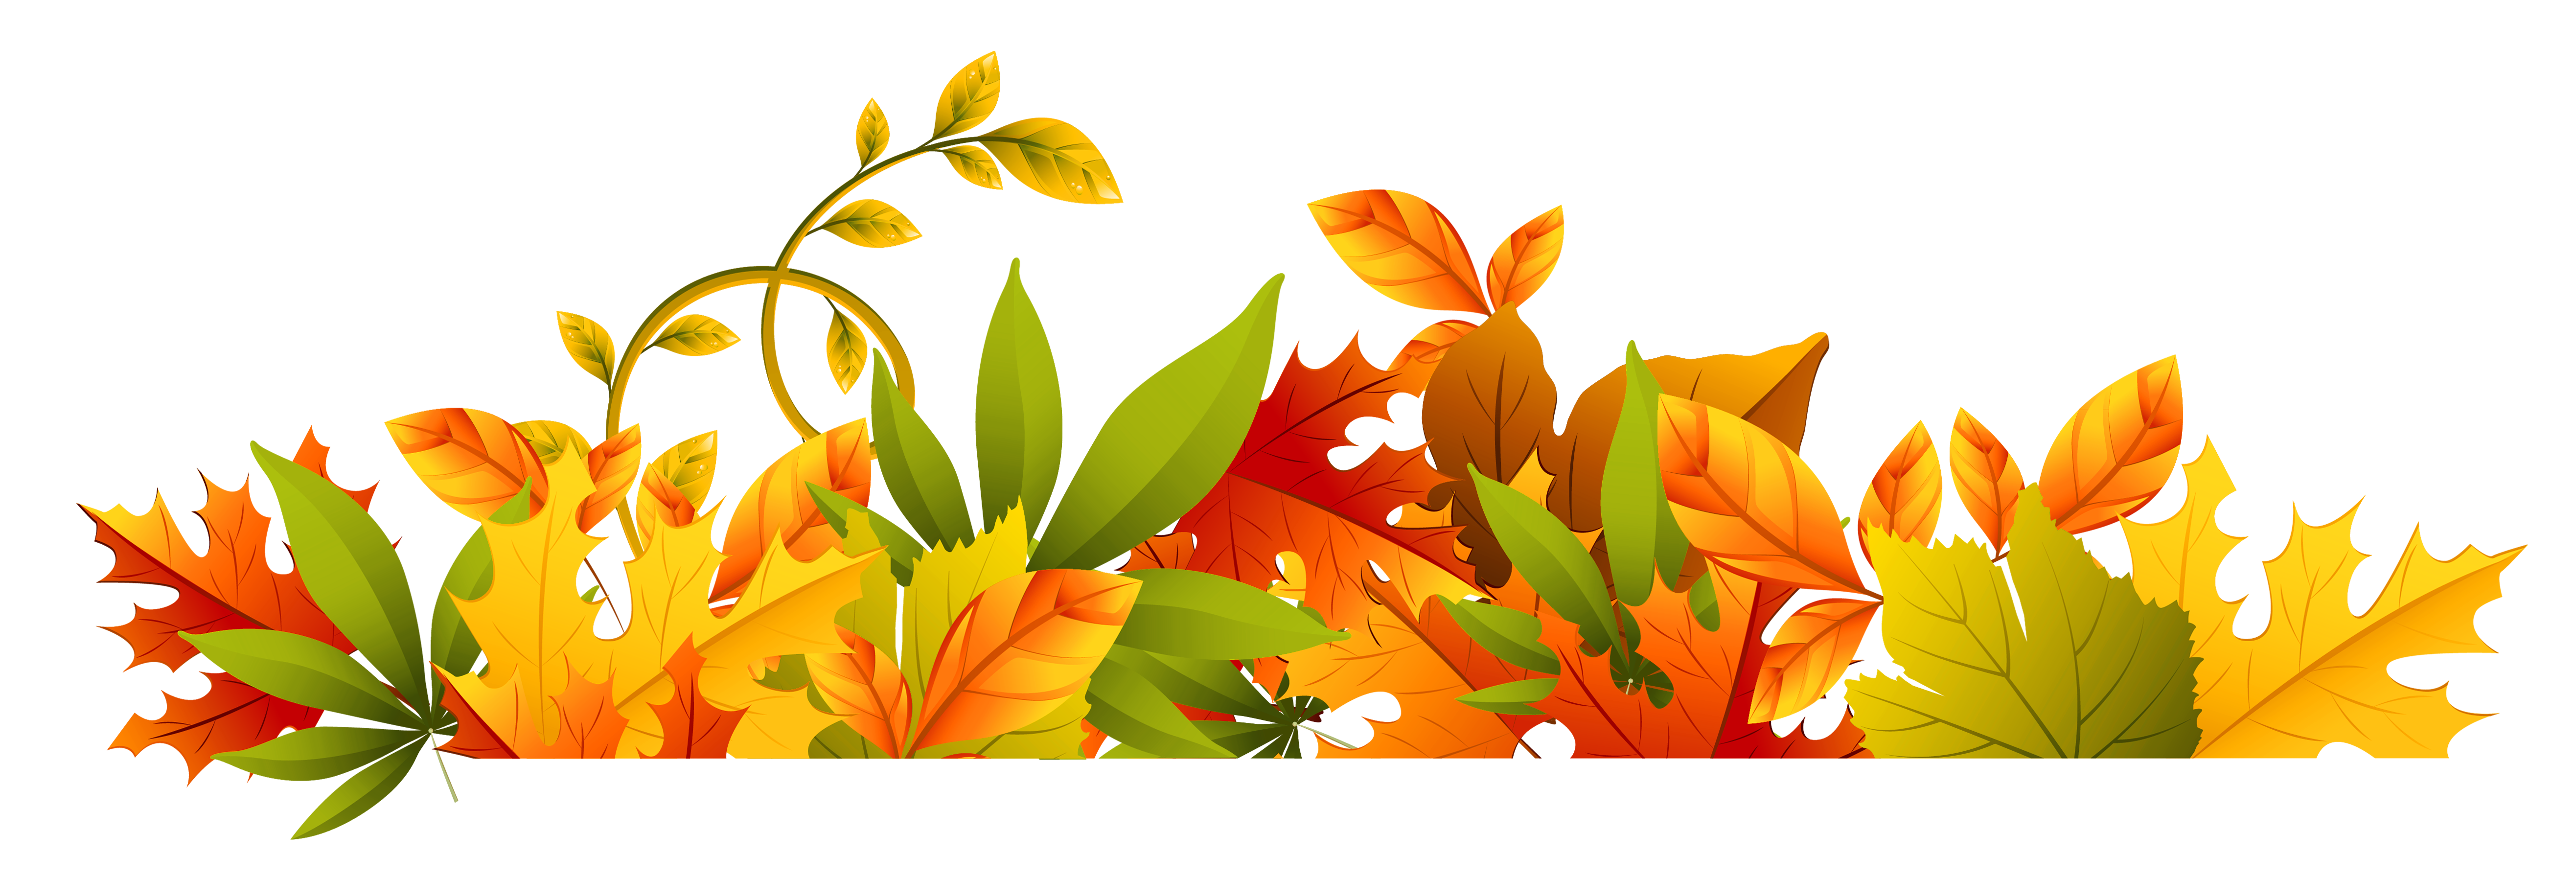 Thanksgiving border png. Transparent autumn clipart gallery